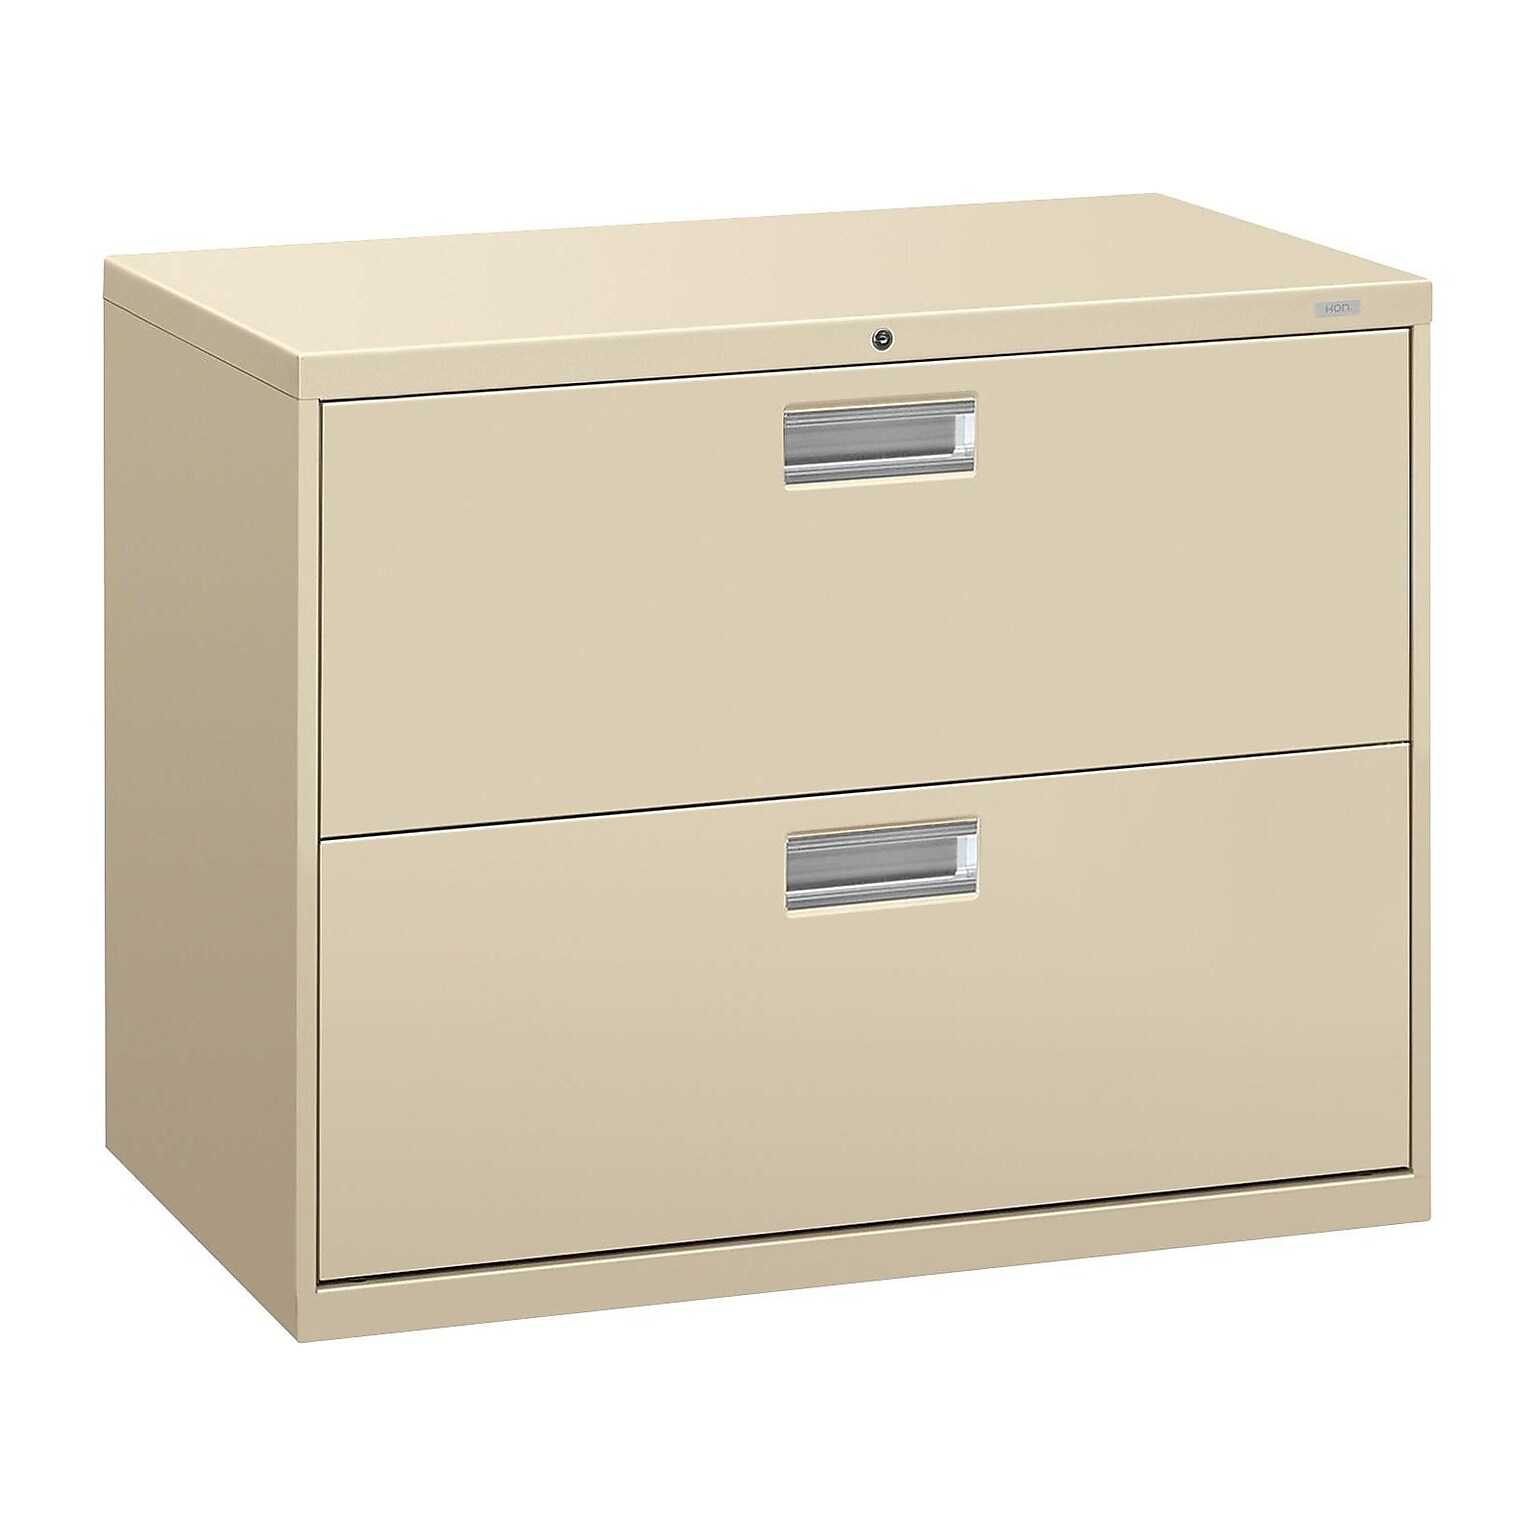 HON Brigade 600 Series 2-Drawer Lateral File Cabinet, Locking, Letter/Legal, Putty/Beige, 36W (H682.L.L)